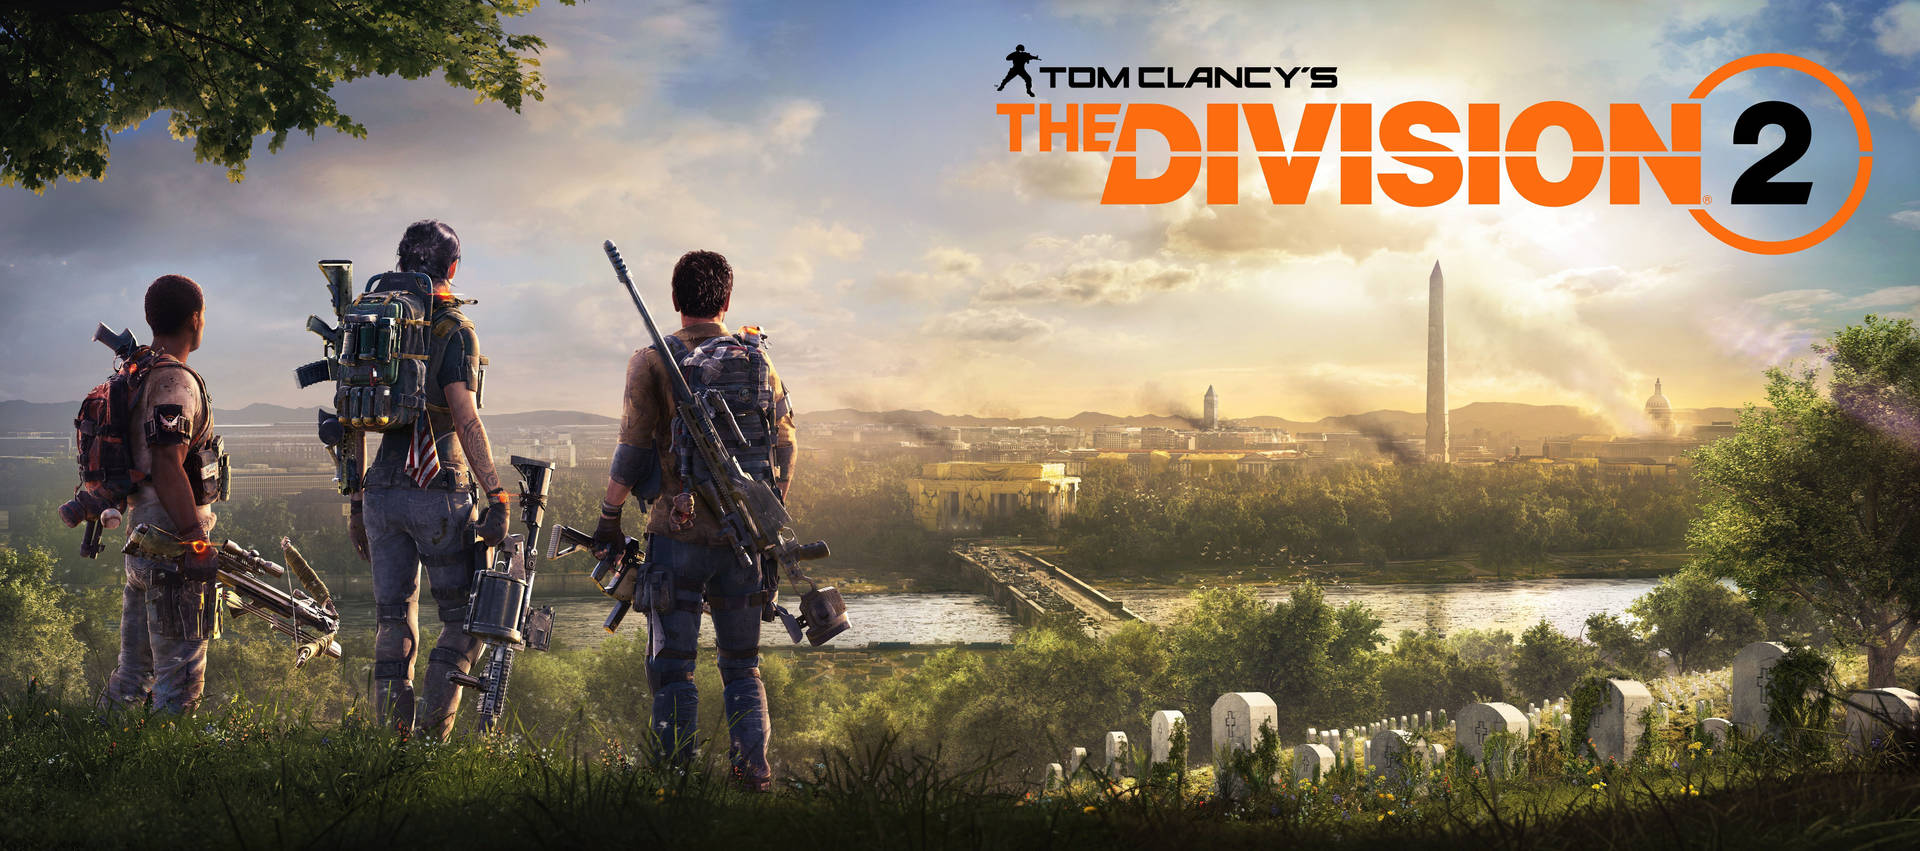 The end of Washington D.C. in The Division 2 Wallpaper